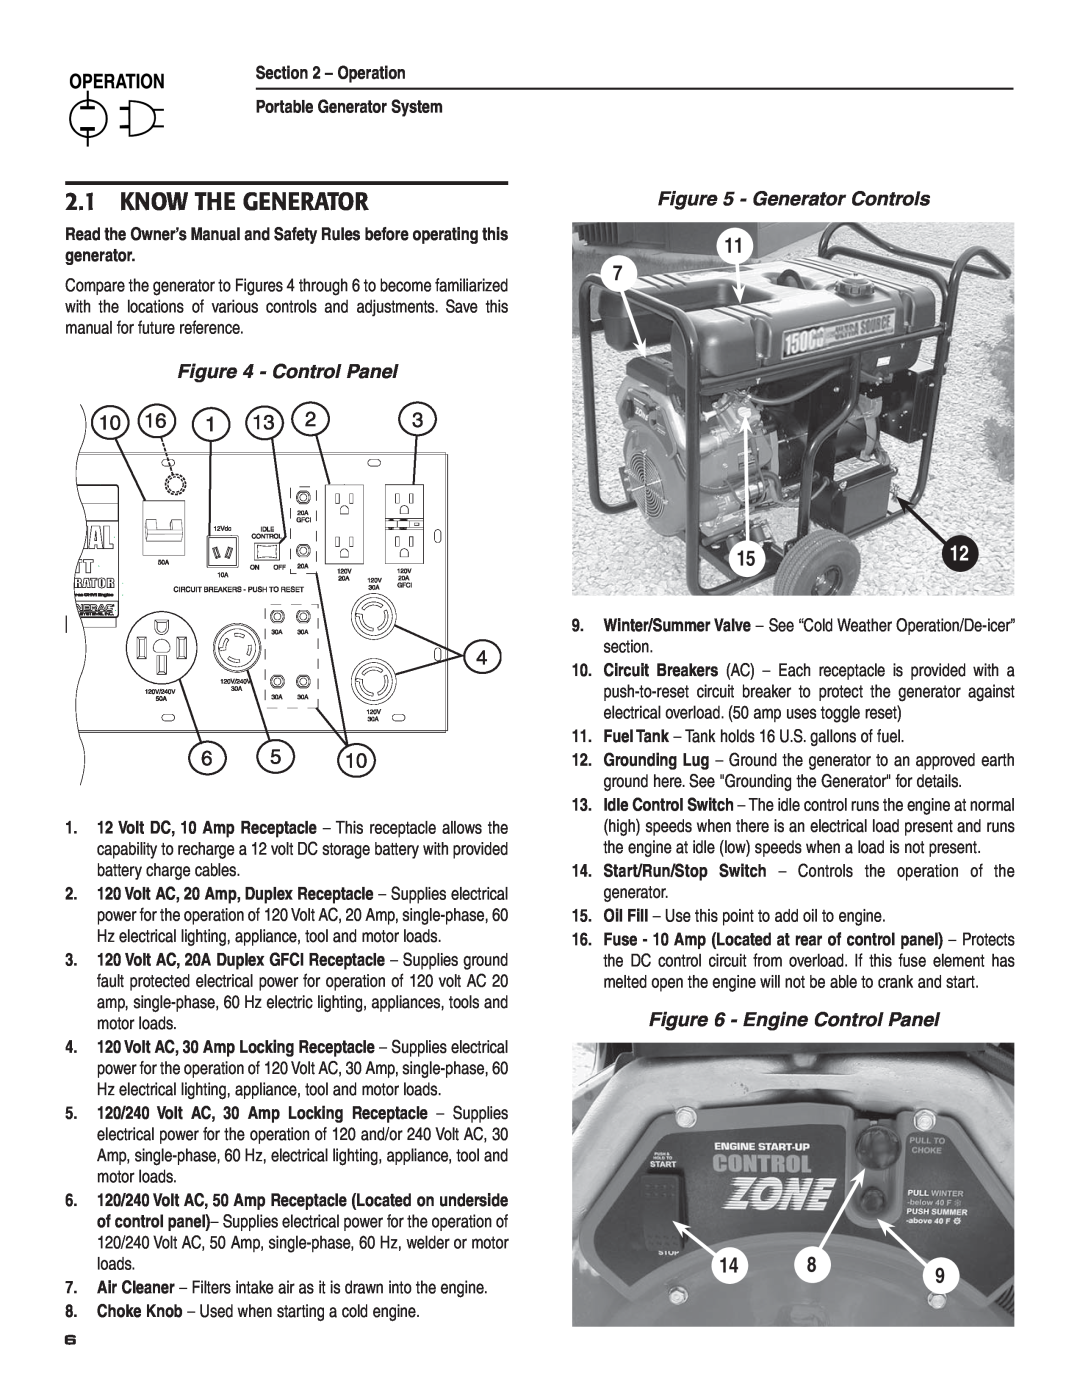 Guardian Technologies 004583-0 owner manual Know The Generator, 1512, Generator Controls, Engine Control Panel 